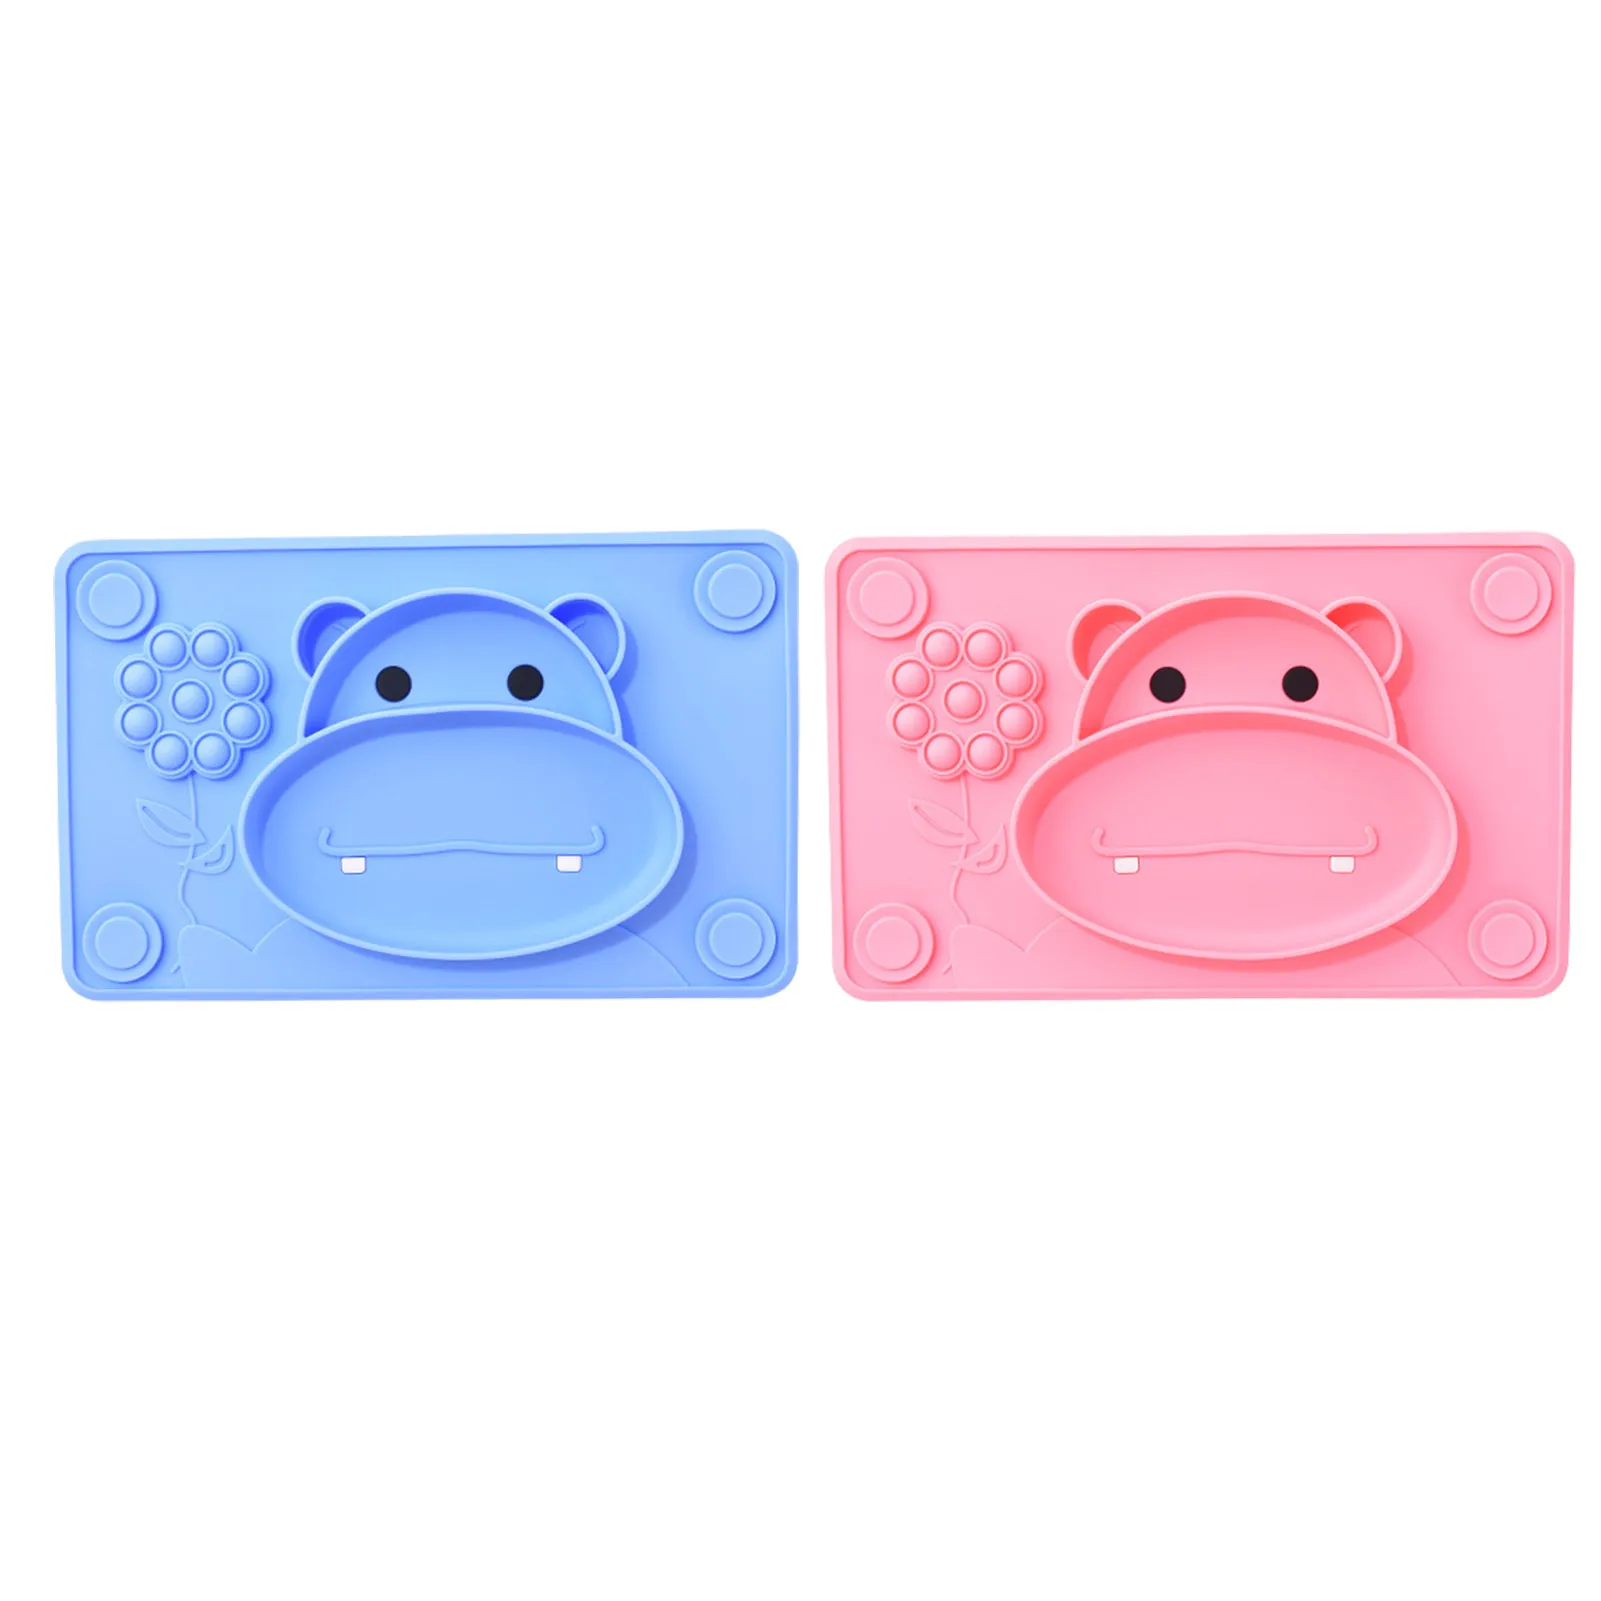 

Suction Plates For Babies & Toddlers Plates Stay Put With Suction Feature Divided Design Silicone Plate Dinner Plate With